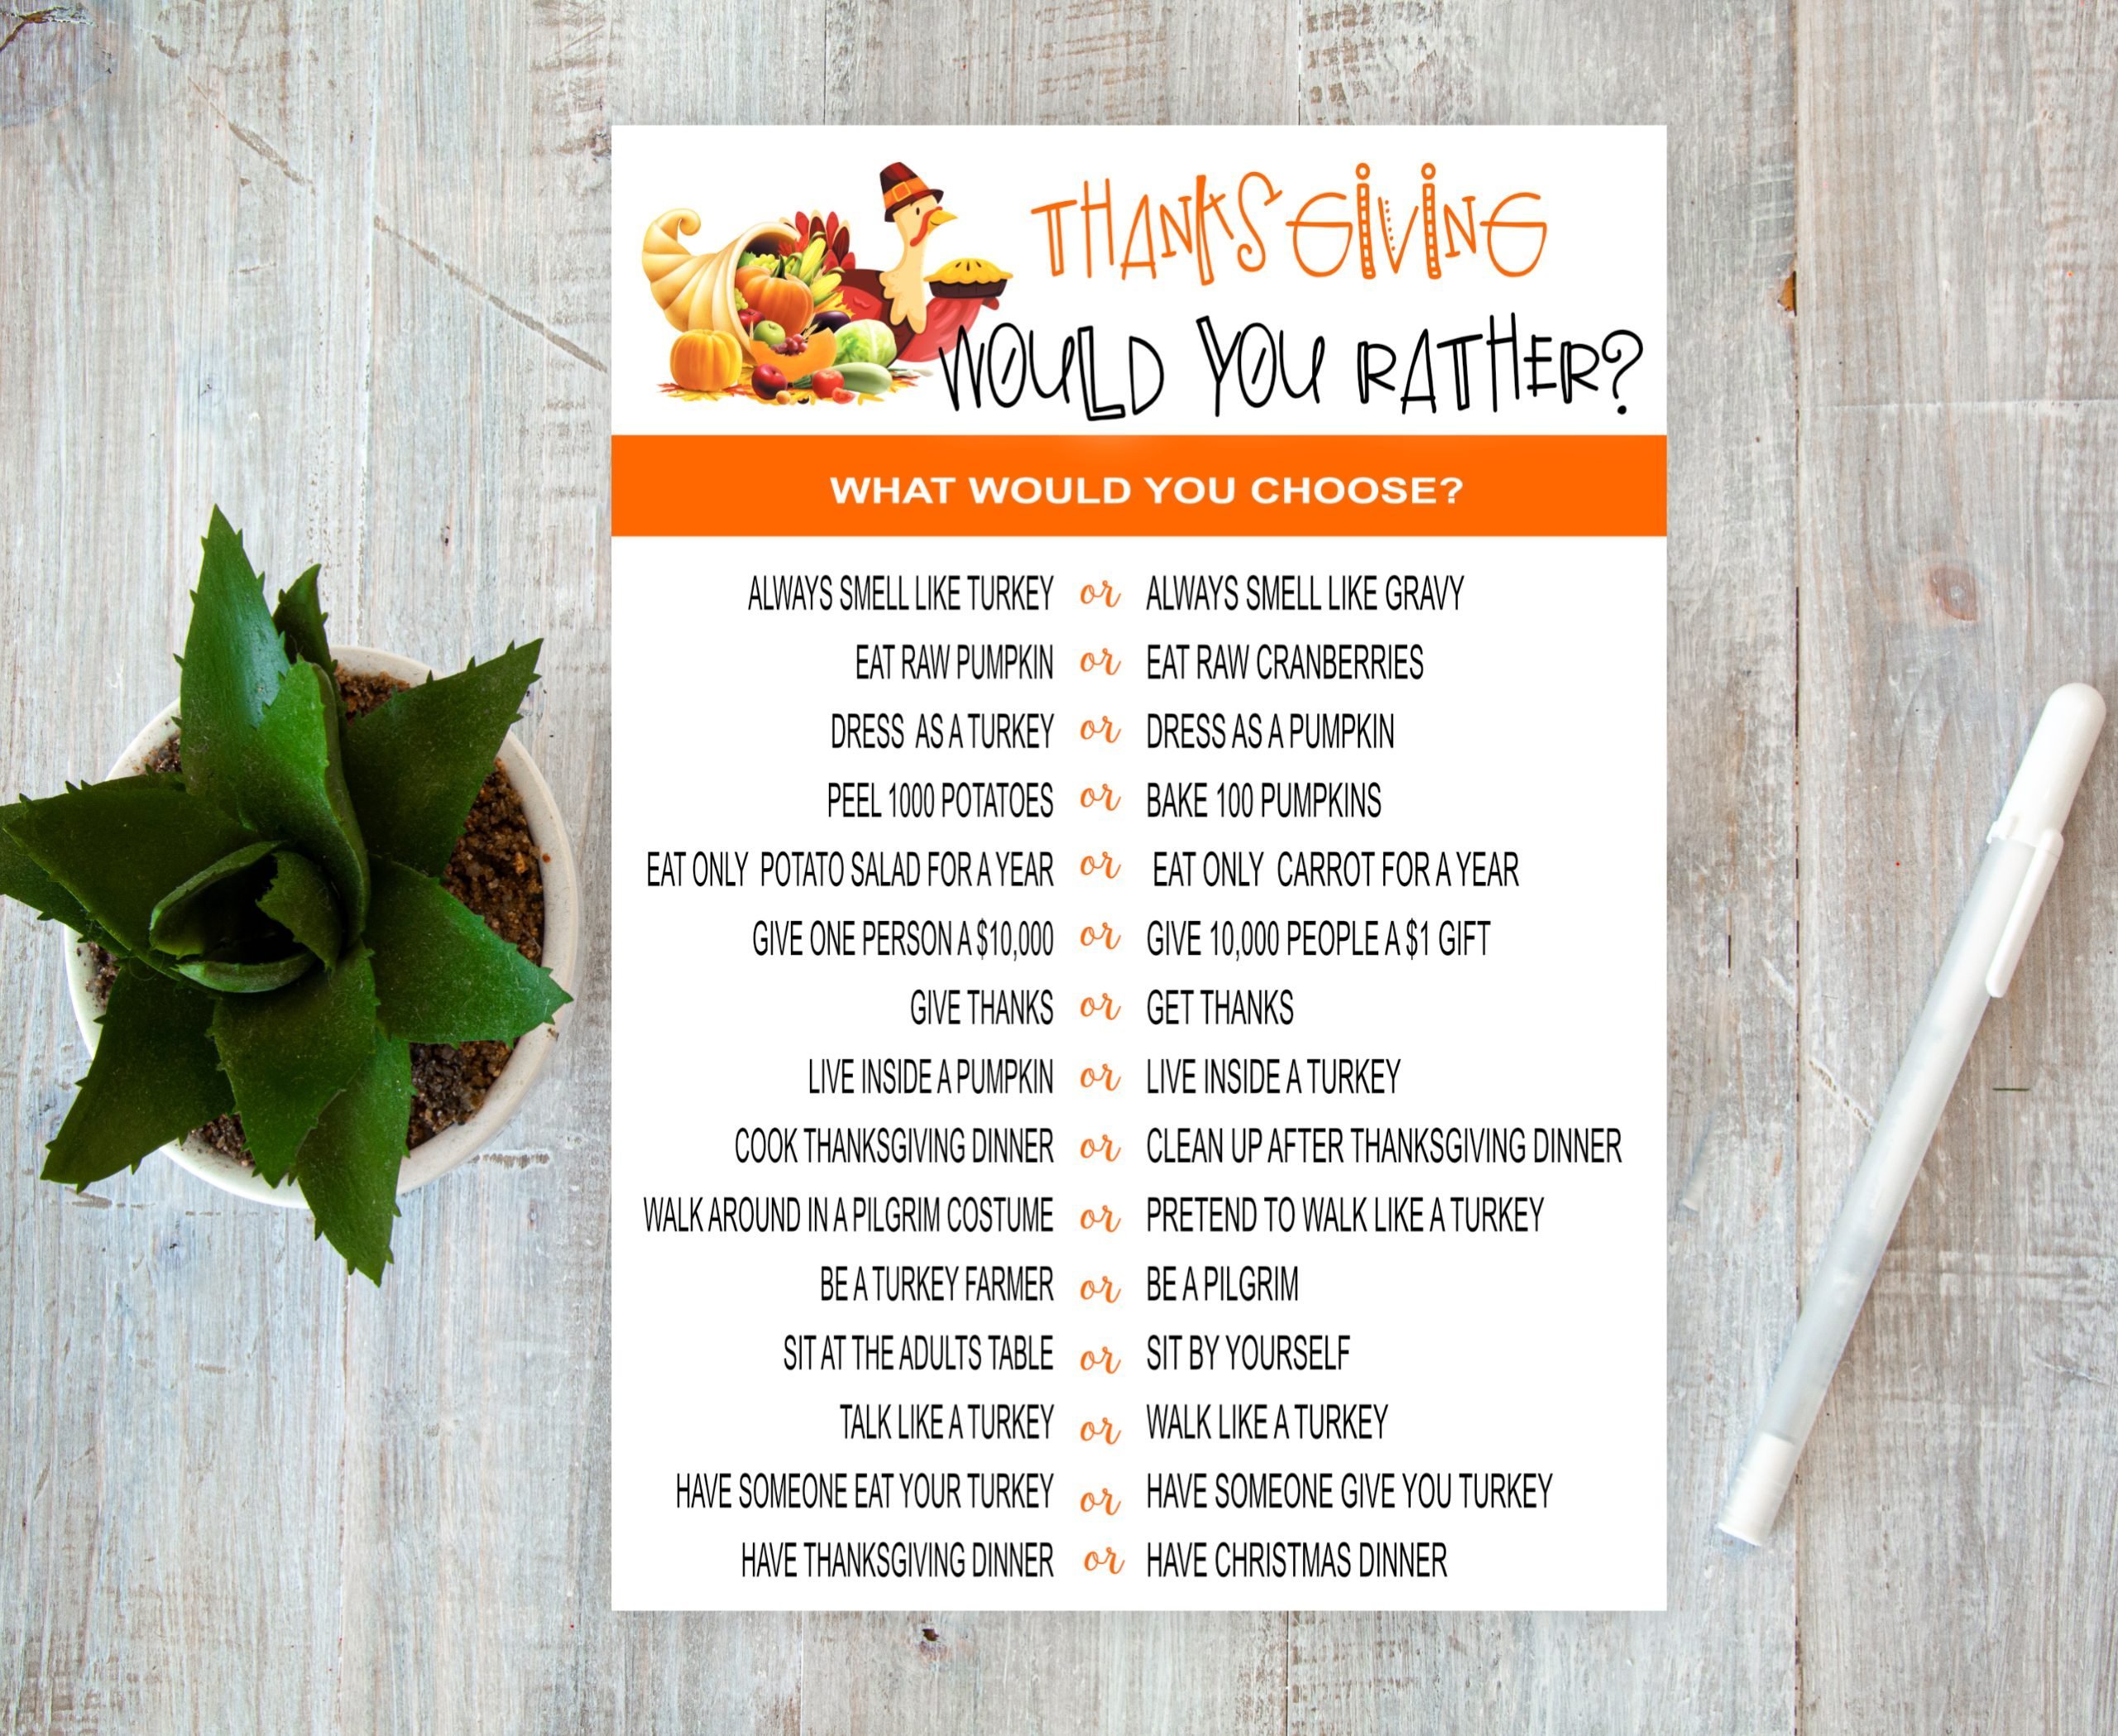 HOLIDAY Thanksgiving Would You Rather Game – Printable Thanksgiving Day Game for Adults and Kids family-friendly game